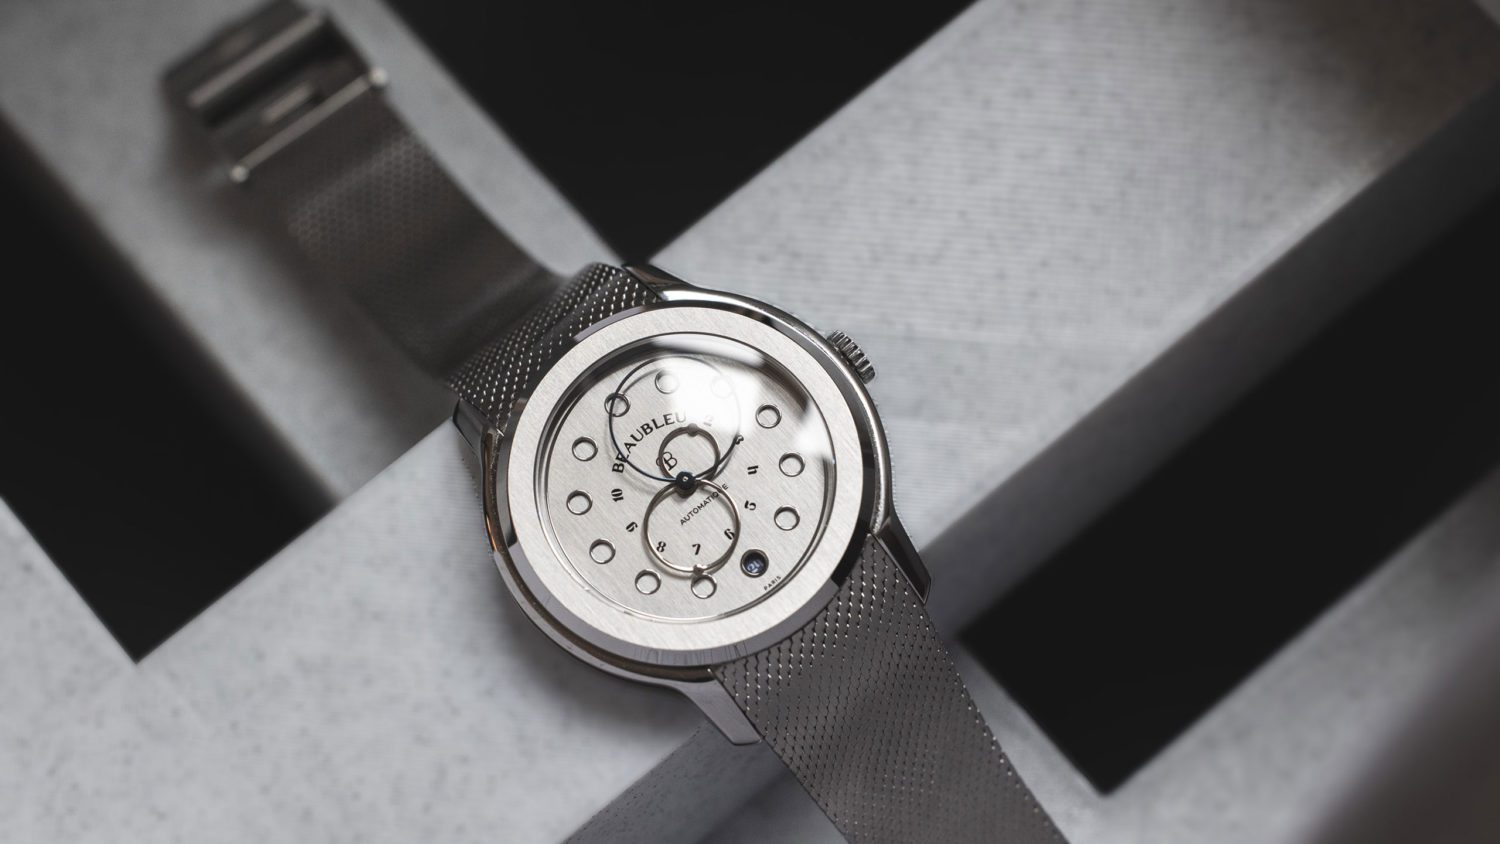 <p class="p1">The Vitruve Date Steel seems to be sculpted from a single block of steel. This watch is inspired by everyday time, a repetitive time that sets the rhythm for the day. The brushed steel dial blends into its matte and polished case where you can sight the discreet and readable date at 6.</p>